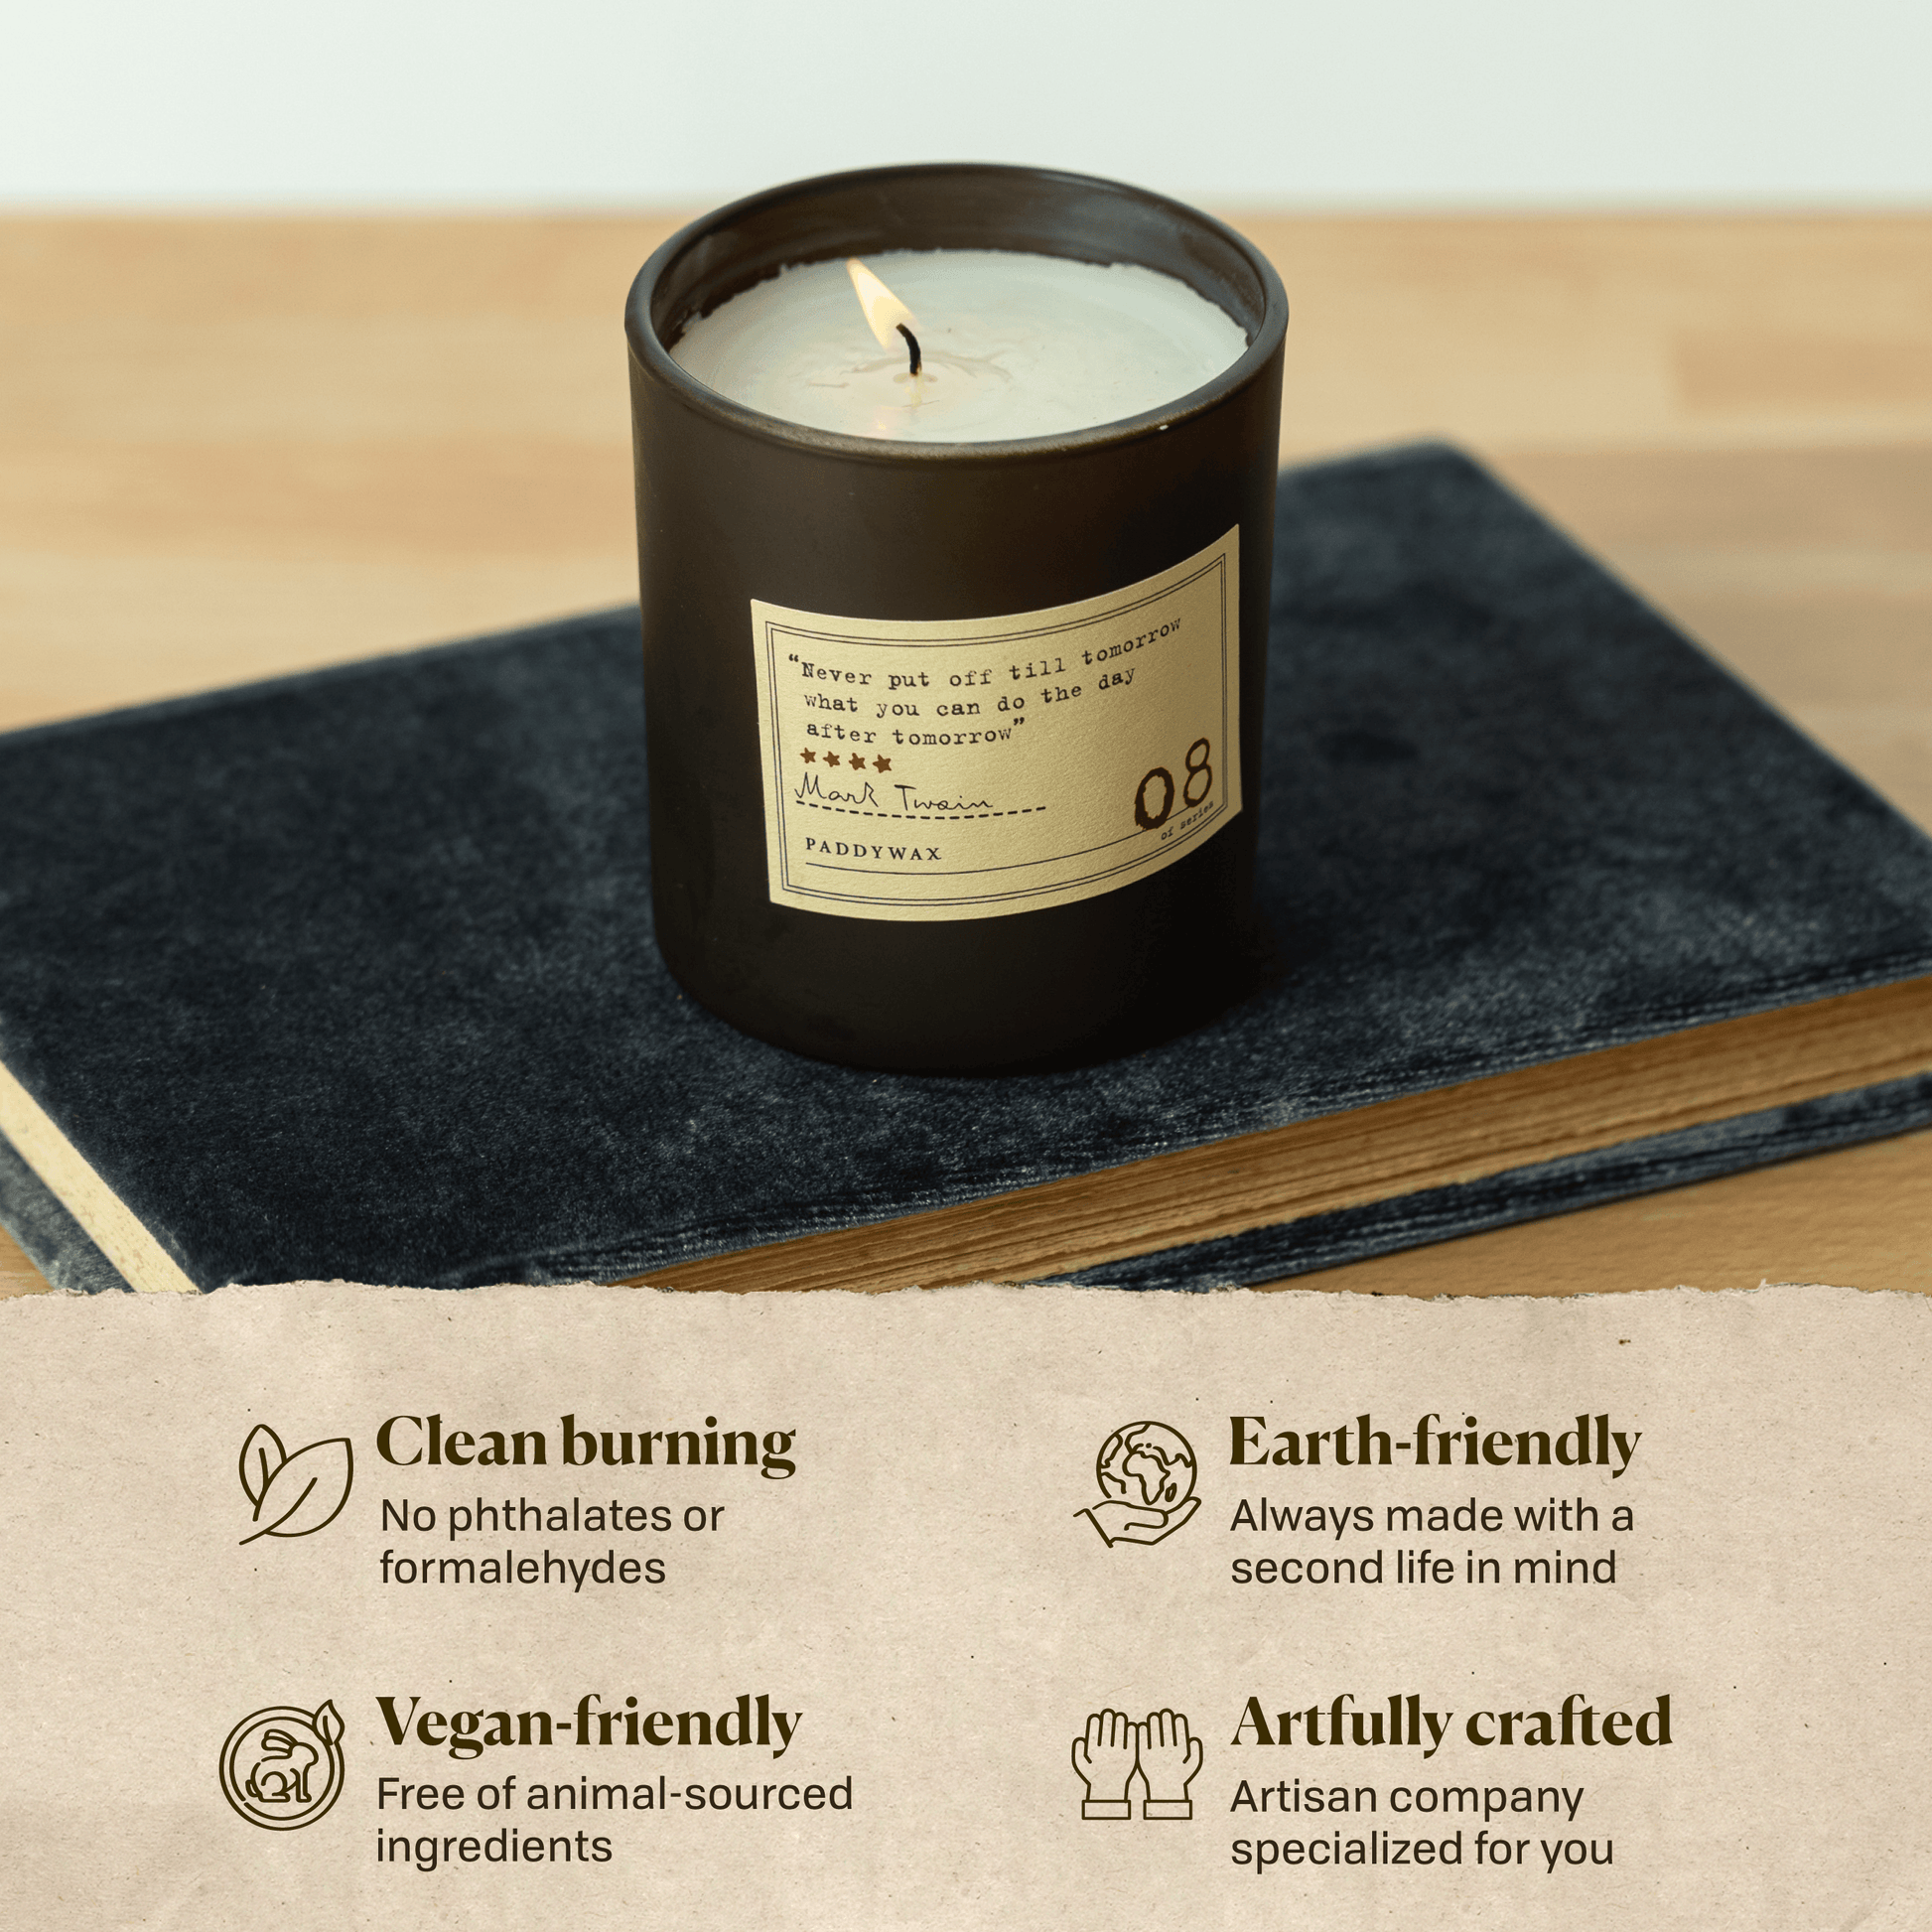 A photo of the Mark Twain candle sitting on a book. Clean burning: no phthalates or formaldehydes. Earth-friendly: Always made with a second life in mind. Vegan-friendly: Free of animal sourced ingredients. Artfully crafted: Artisan company specialized for you. 